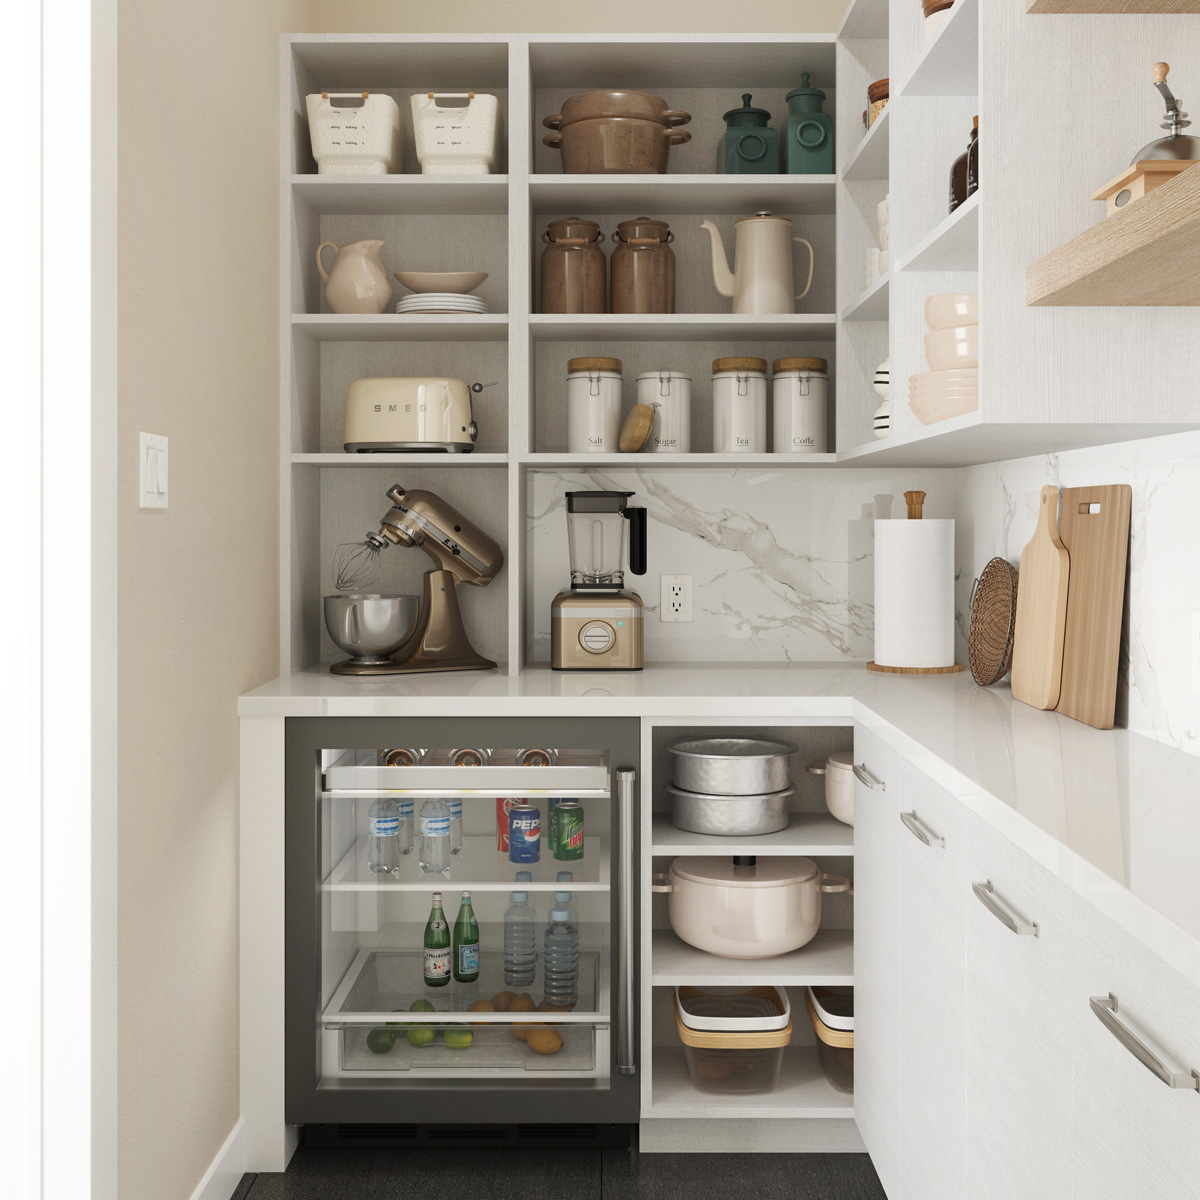 Pantry Dimensions for Every Type and Design